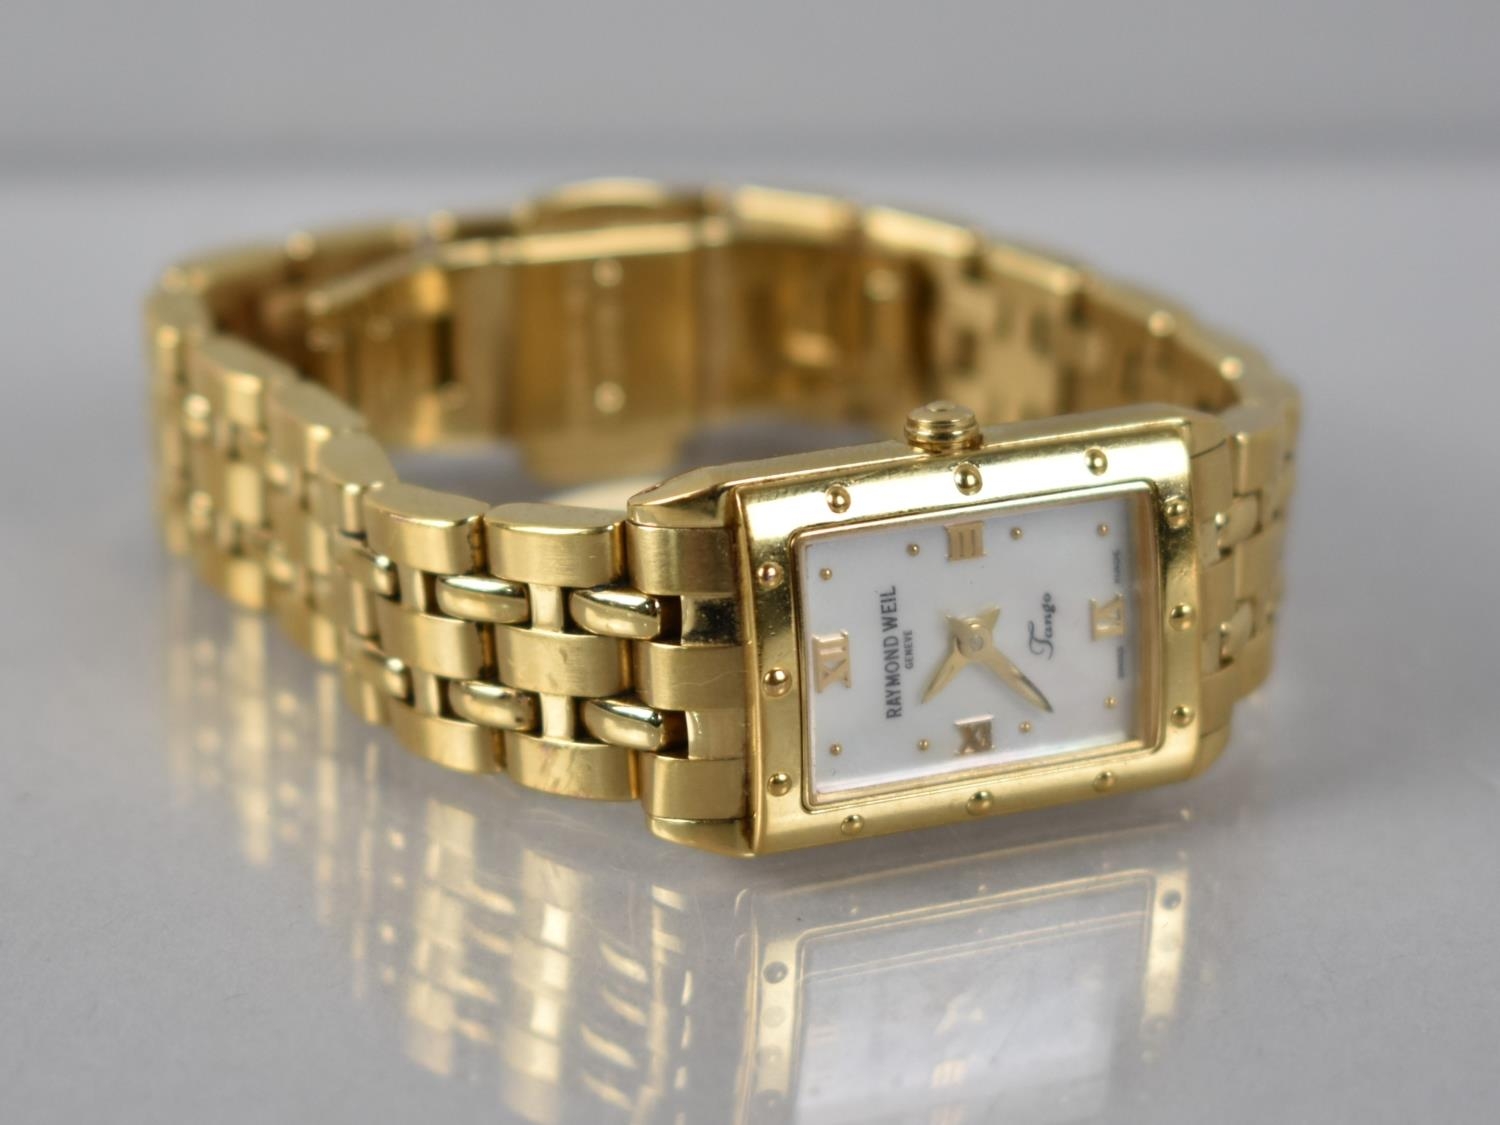 A Raymond Weil Ladies Wristwatch, Tango Model, Mother of Pearl Face with Roman Numeral and Dot